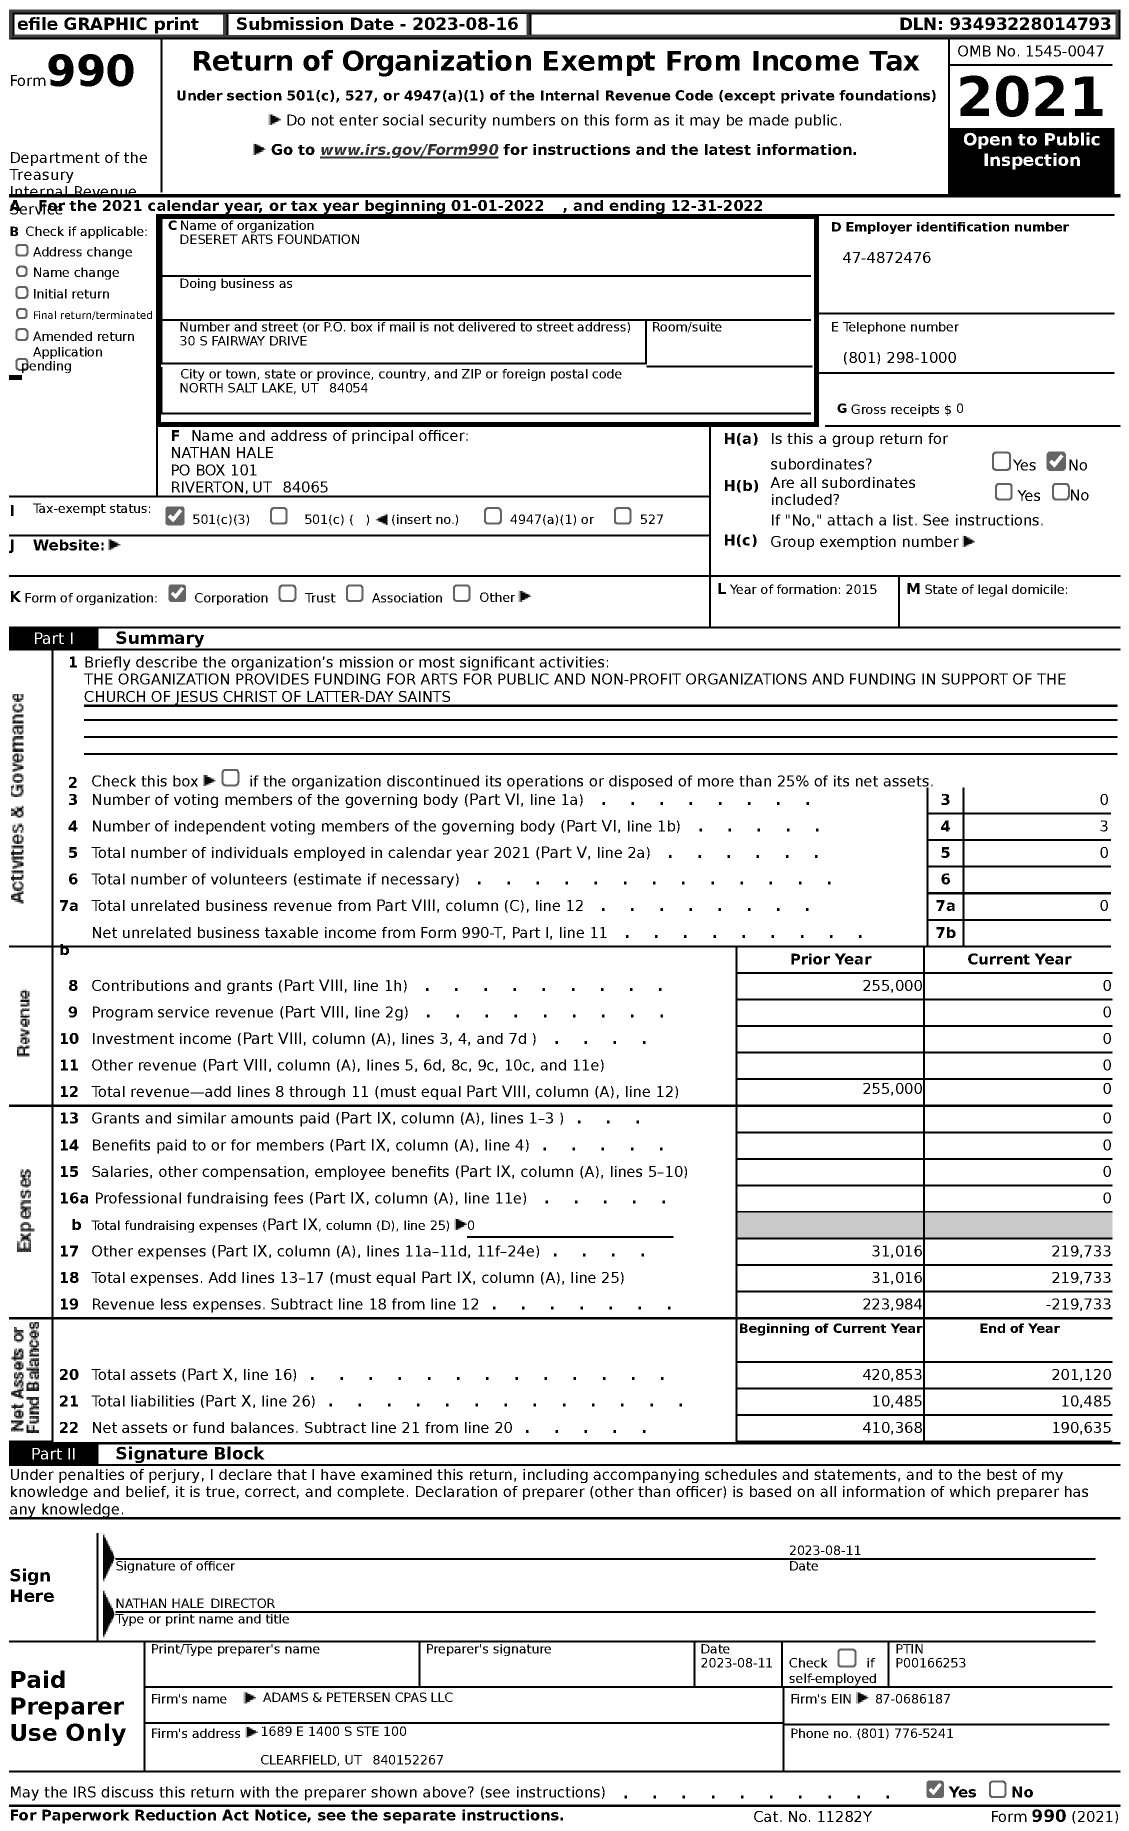 Image of first page of 2022 Form 990 for Deseret Arts Foundation